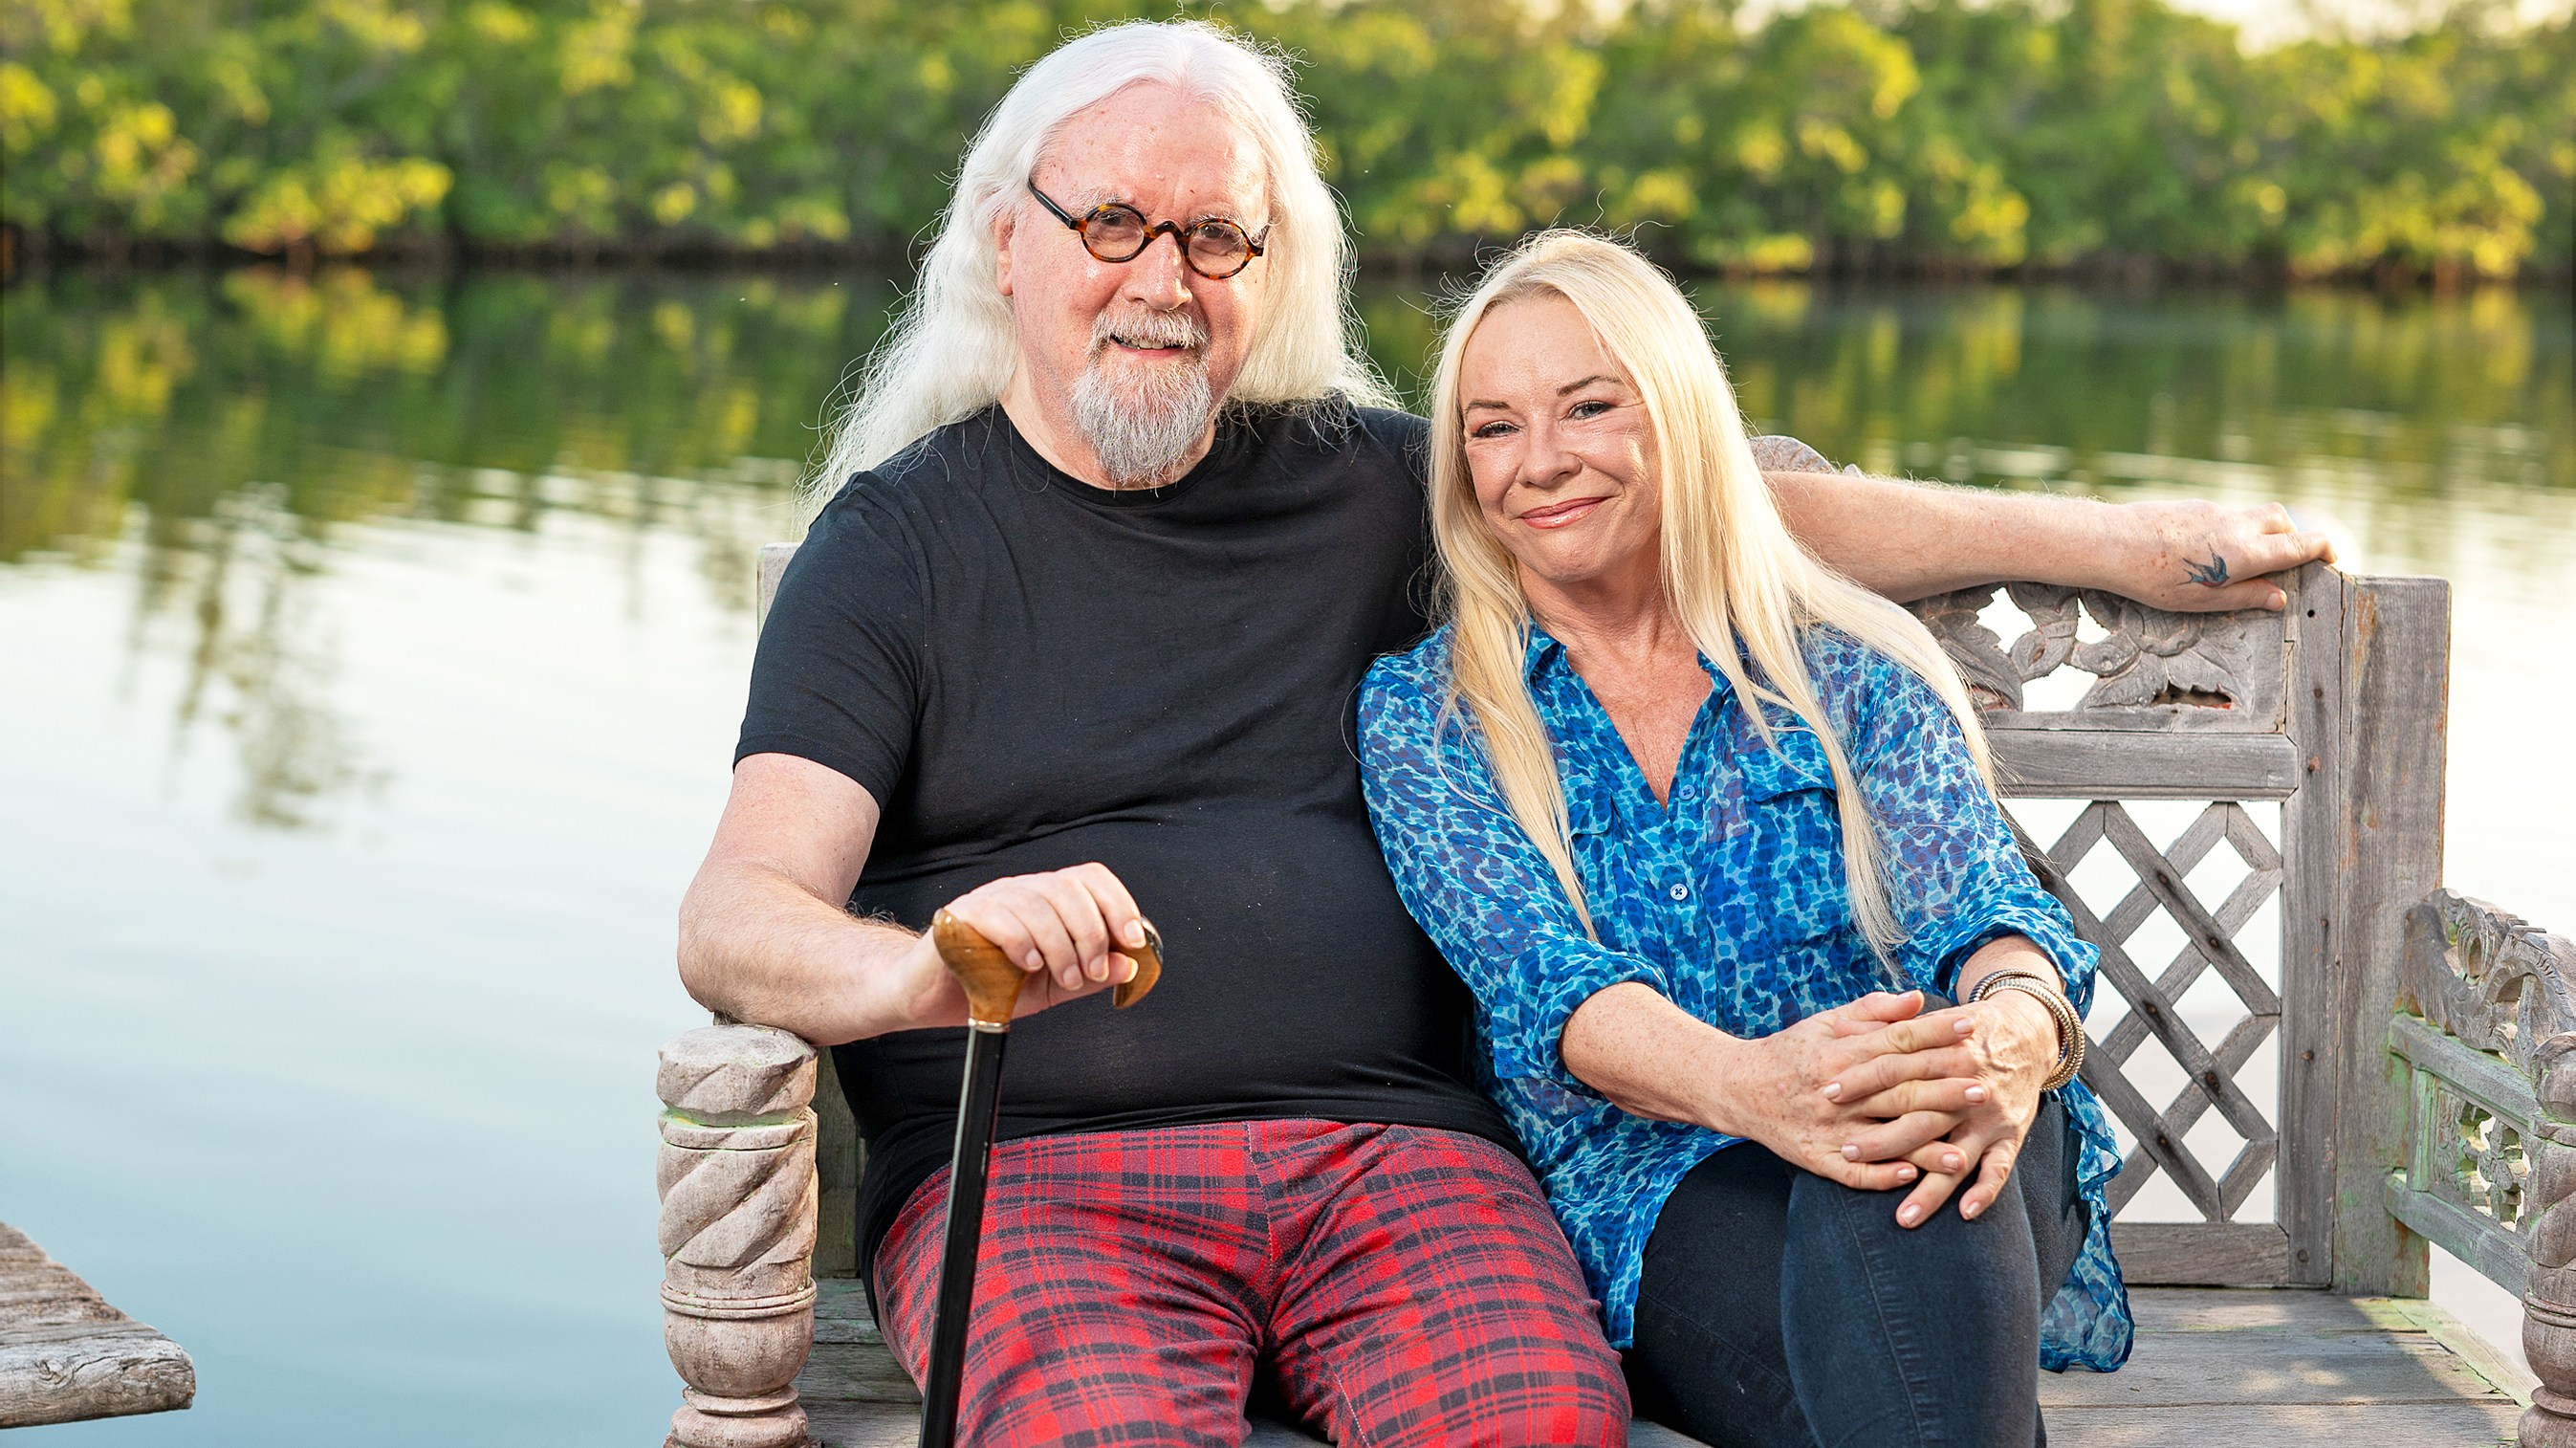 Billy Connolly with Pamela Stephenson: “‘I have a lovely time now. It’s just a different kind of lovely time’”